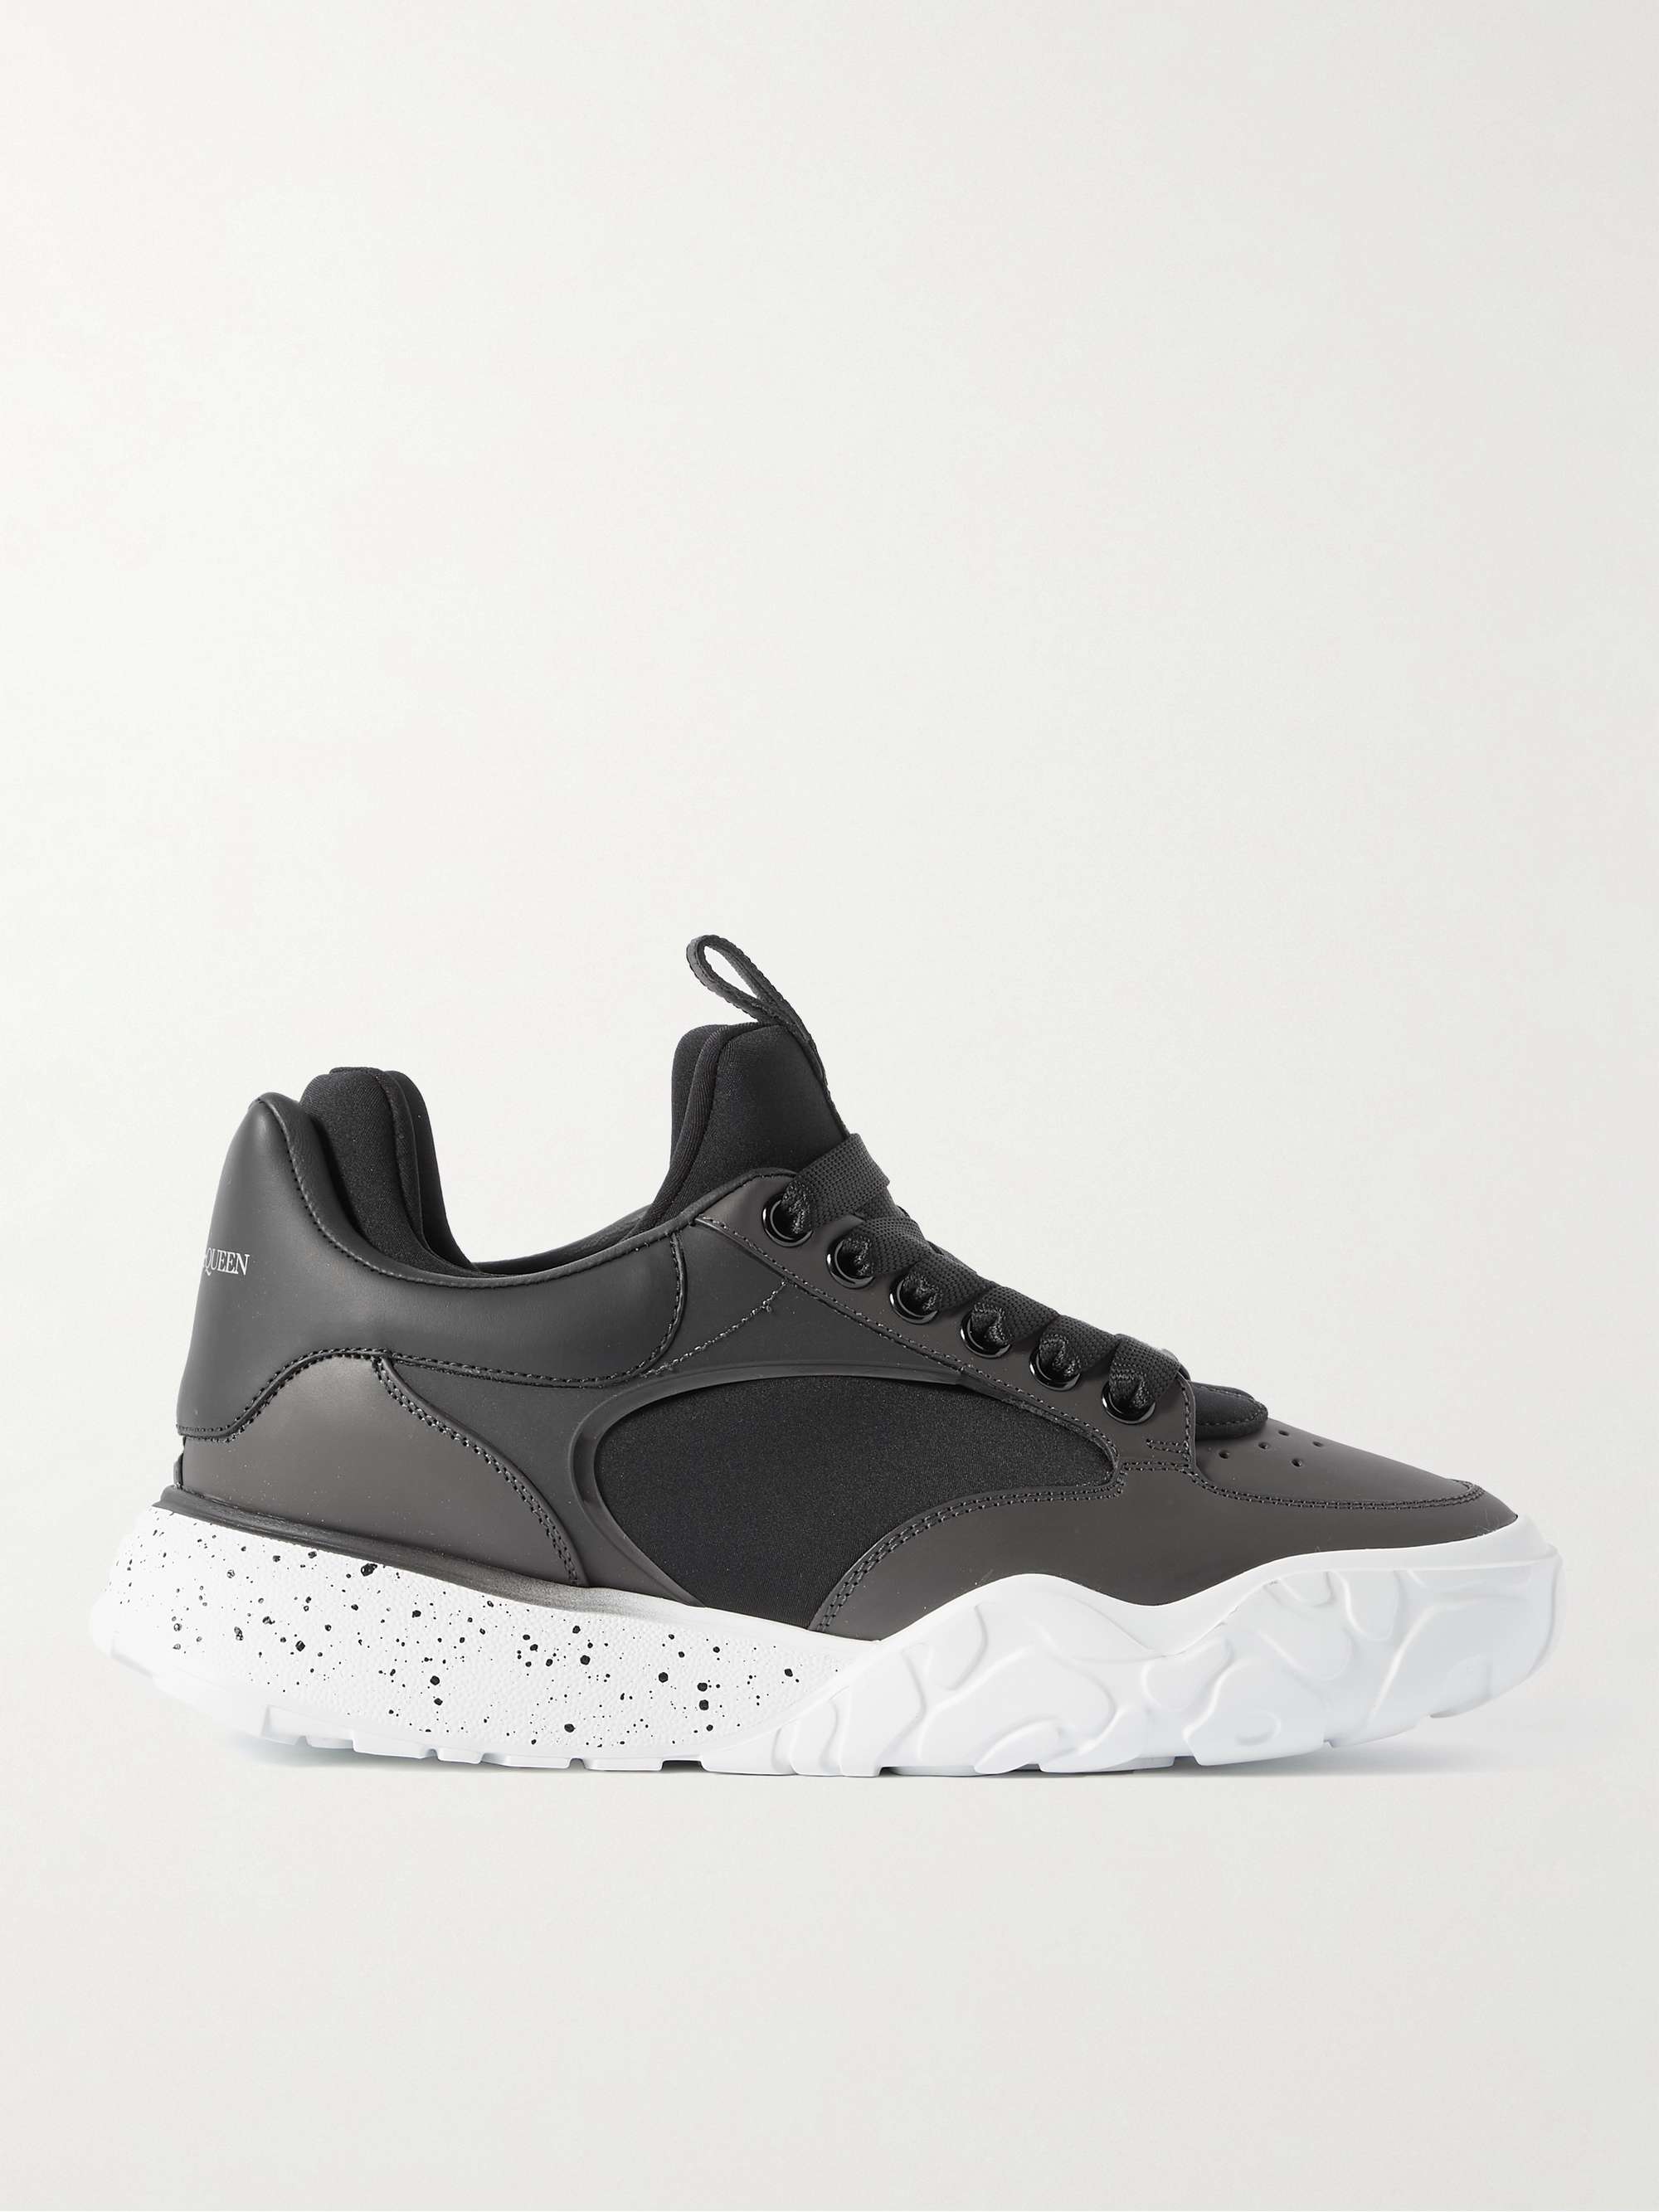 ALEXANDER MCQUEEN Exaggerated-Sole Neoprene and Leather Sneakers